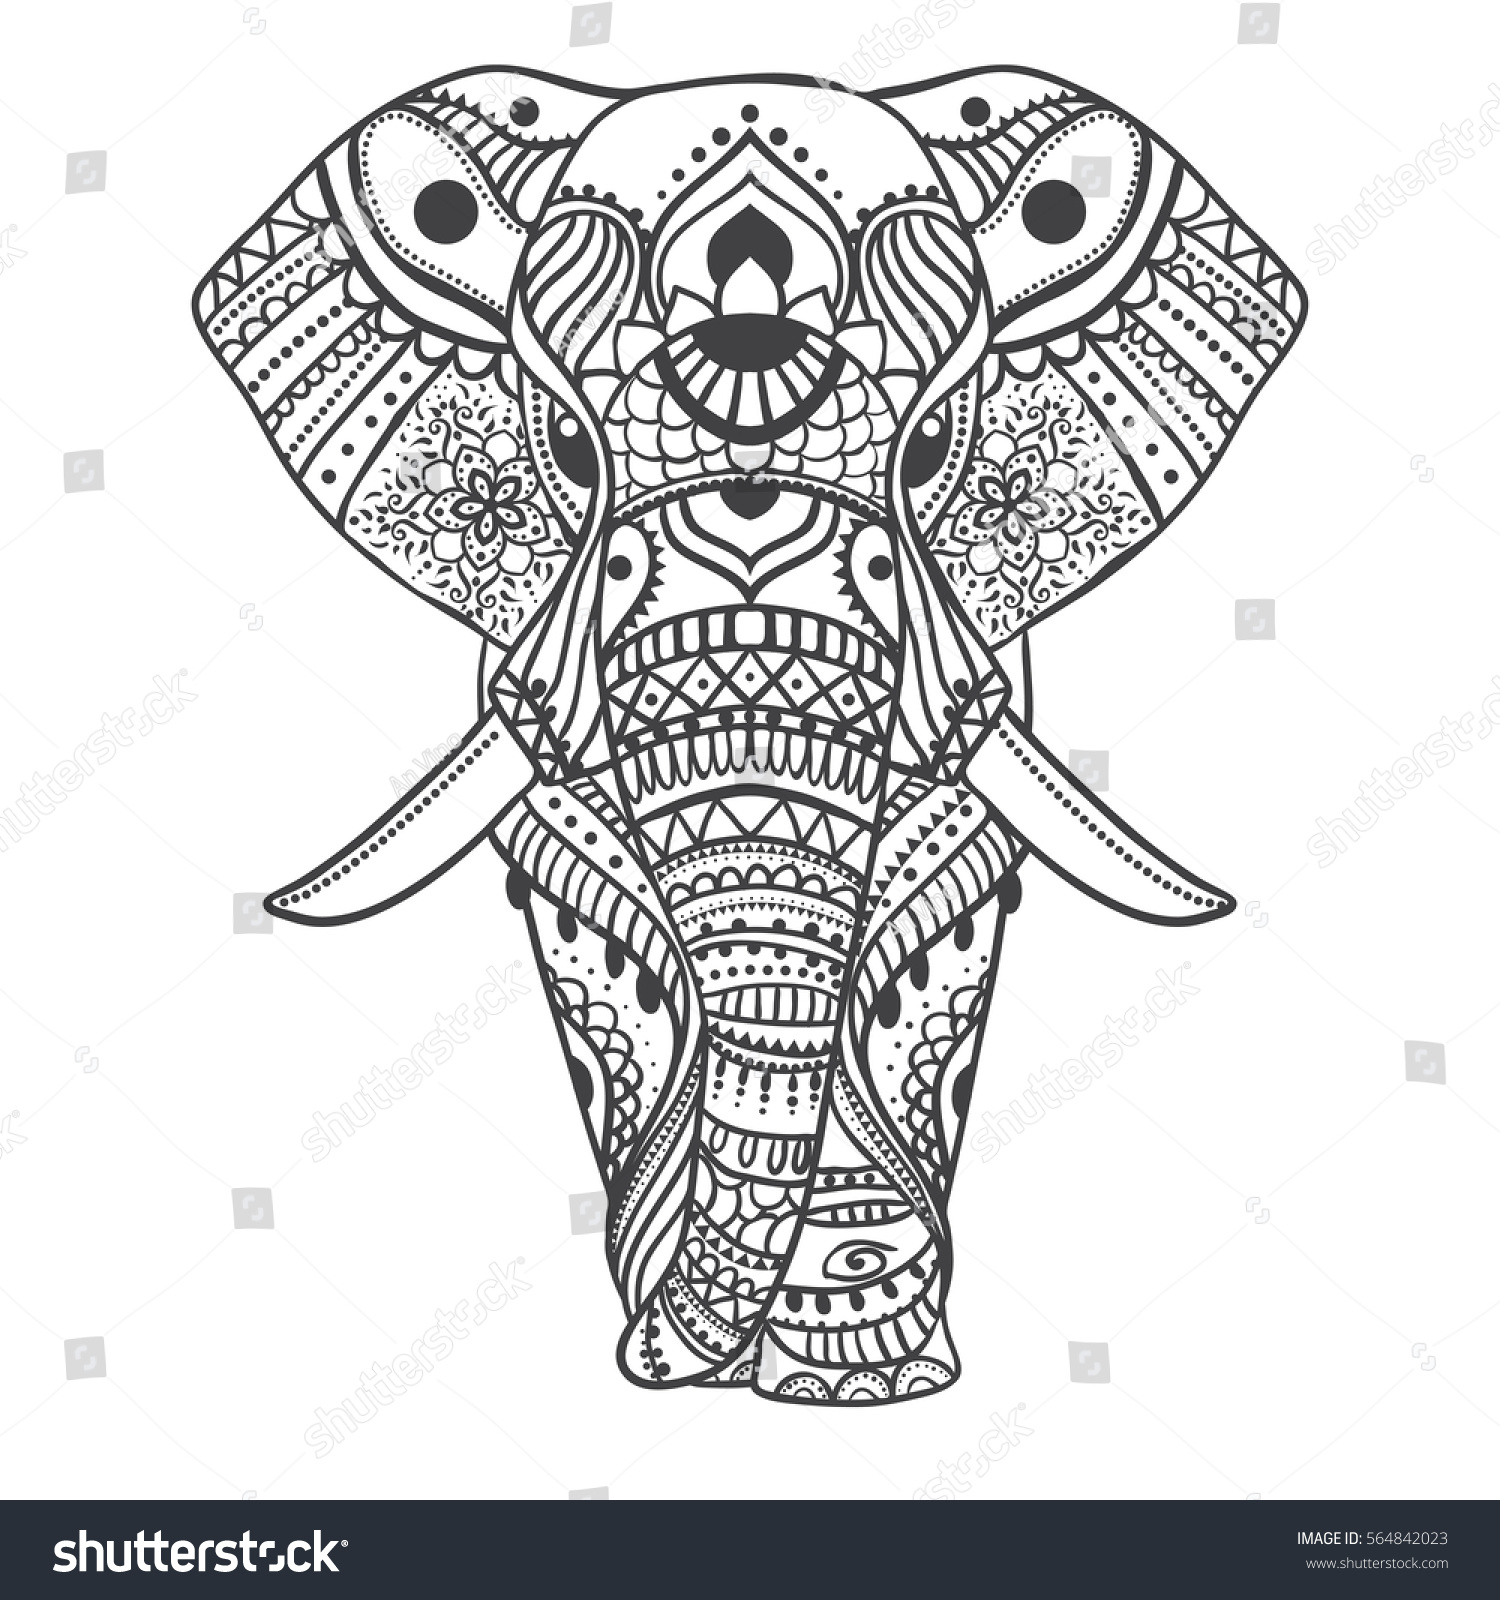 SVG of Greeting Beautiful card with Elephant. Frame of animal made in vector. Illustration for design, pattern, textiles. Hand drawn map with Elephant and mandala. Use for children clothes, pajamas svg